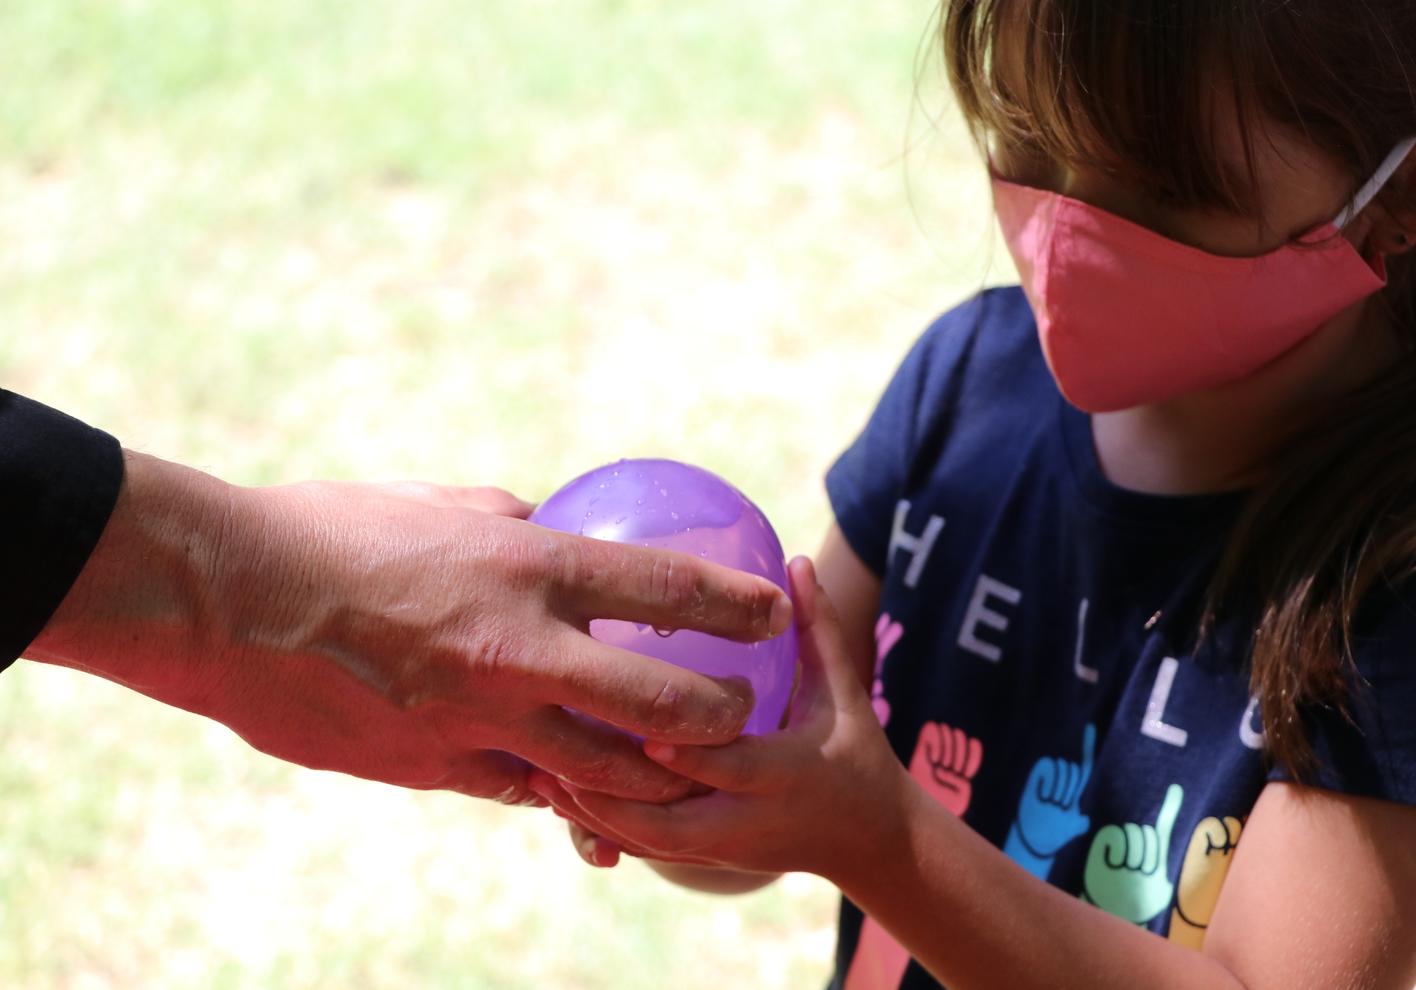 Kids playing water balloon toss game outdoors